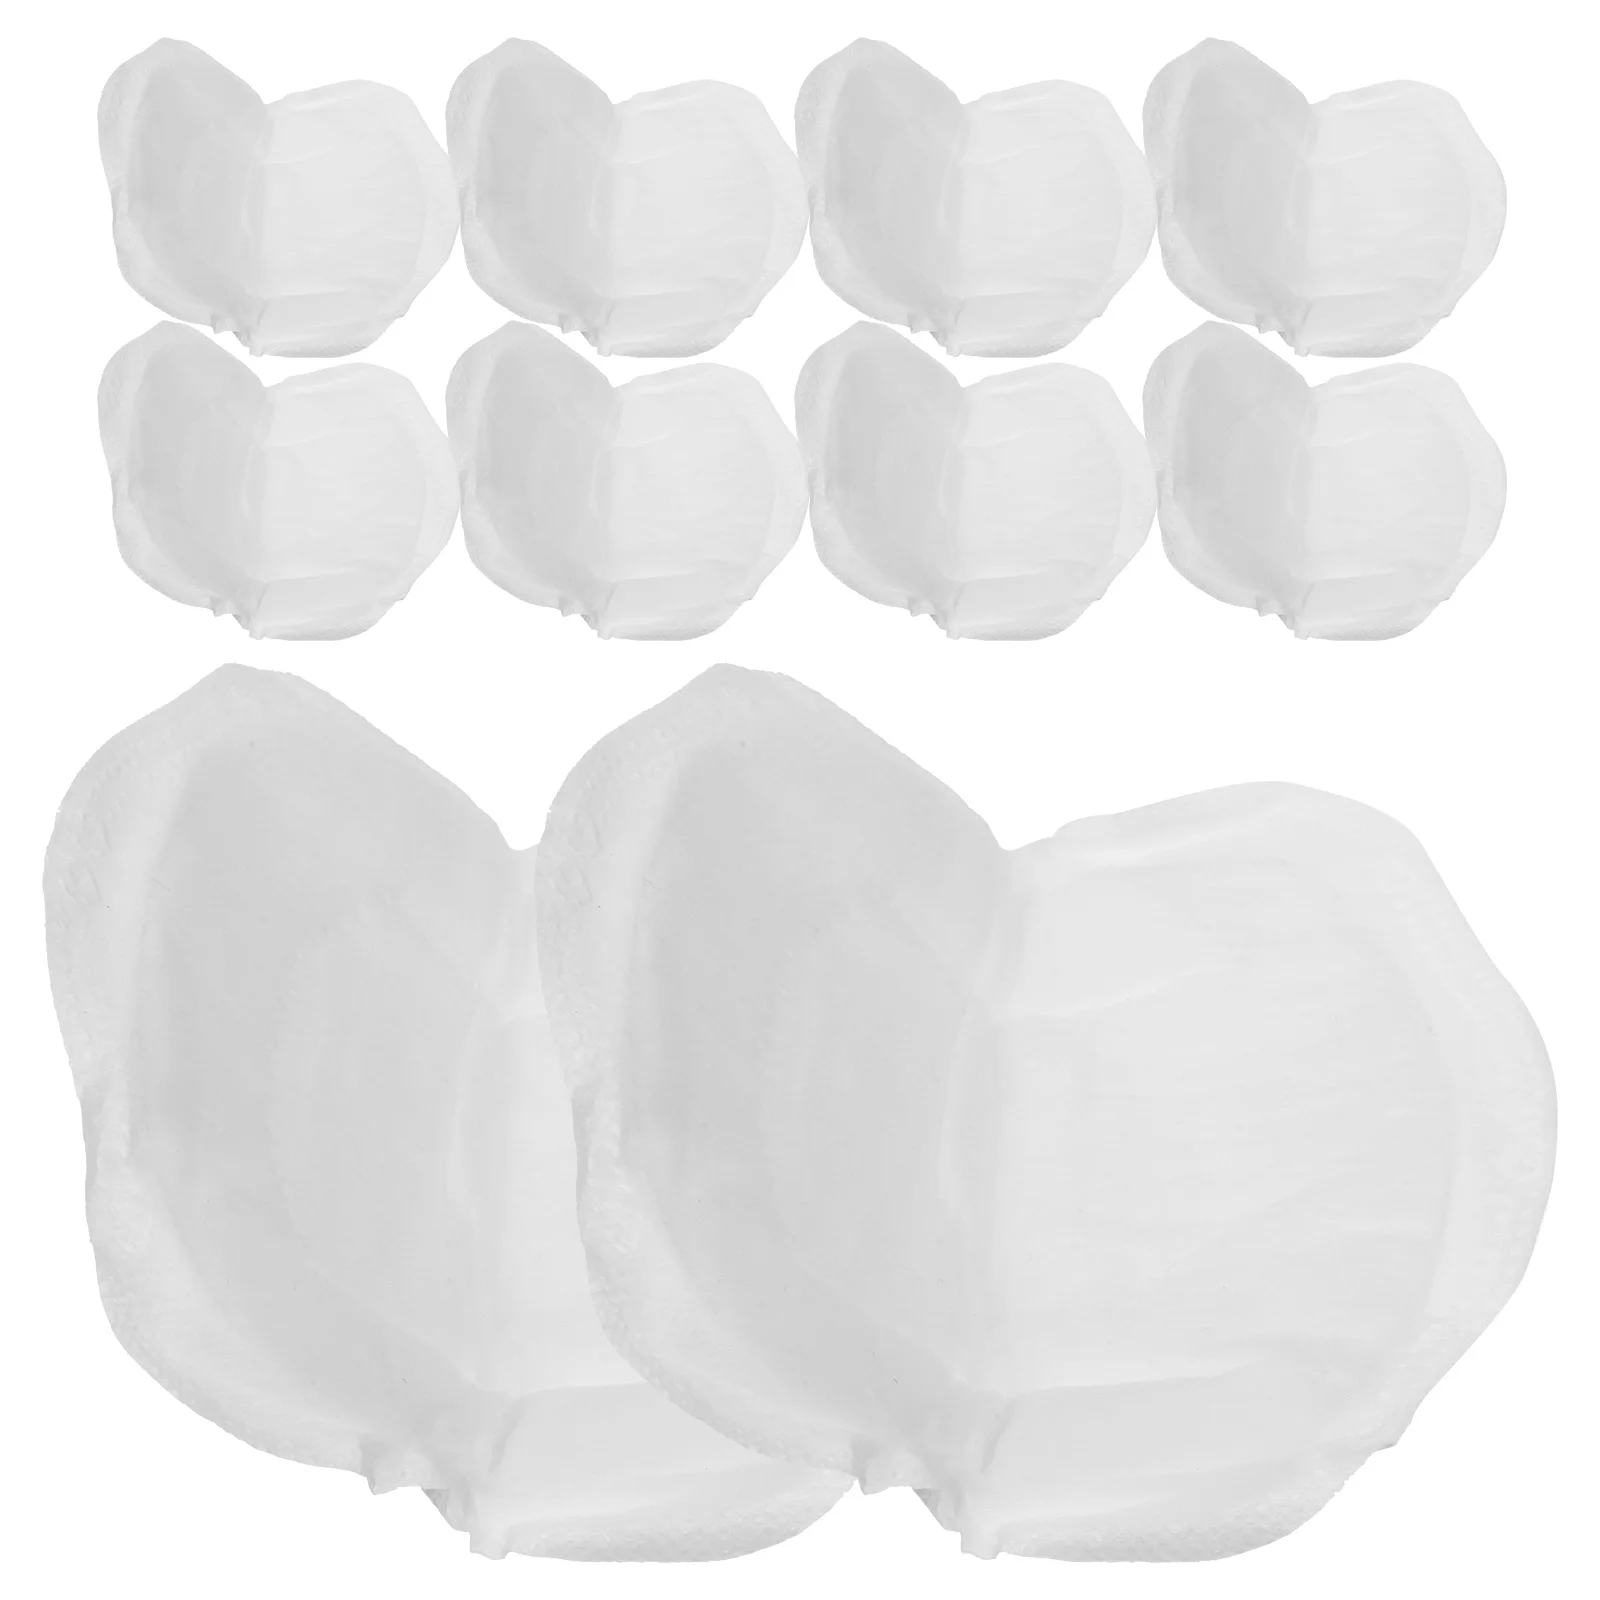 

48 Pcs Breast Pads Absorbent Household Breastfeeding Cushion Breathable for Women Supple Miss